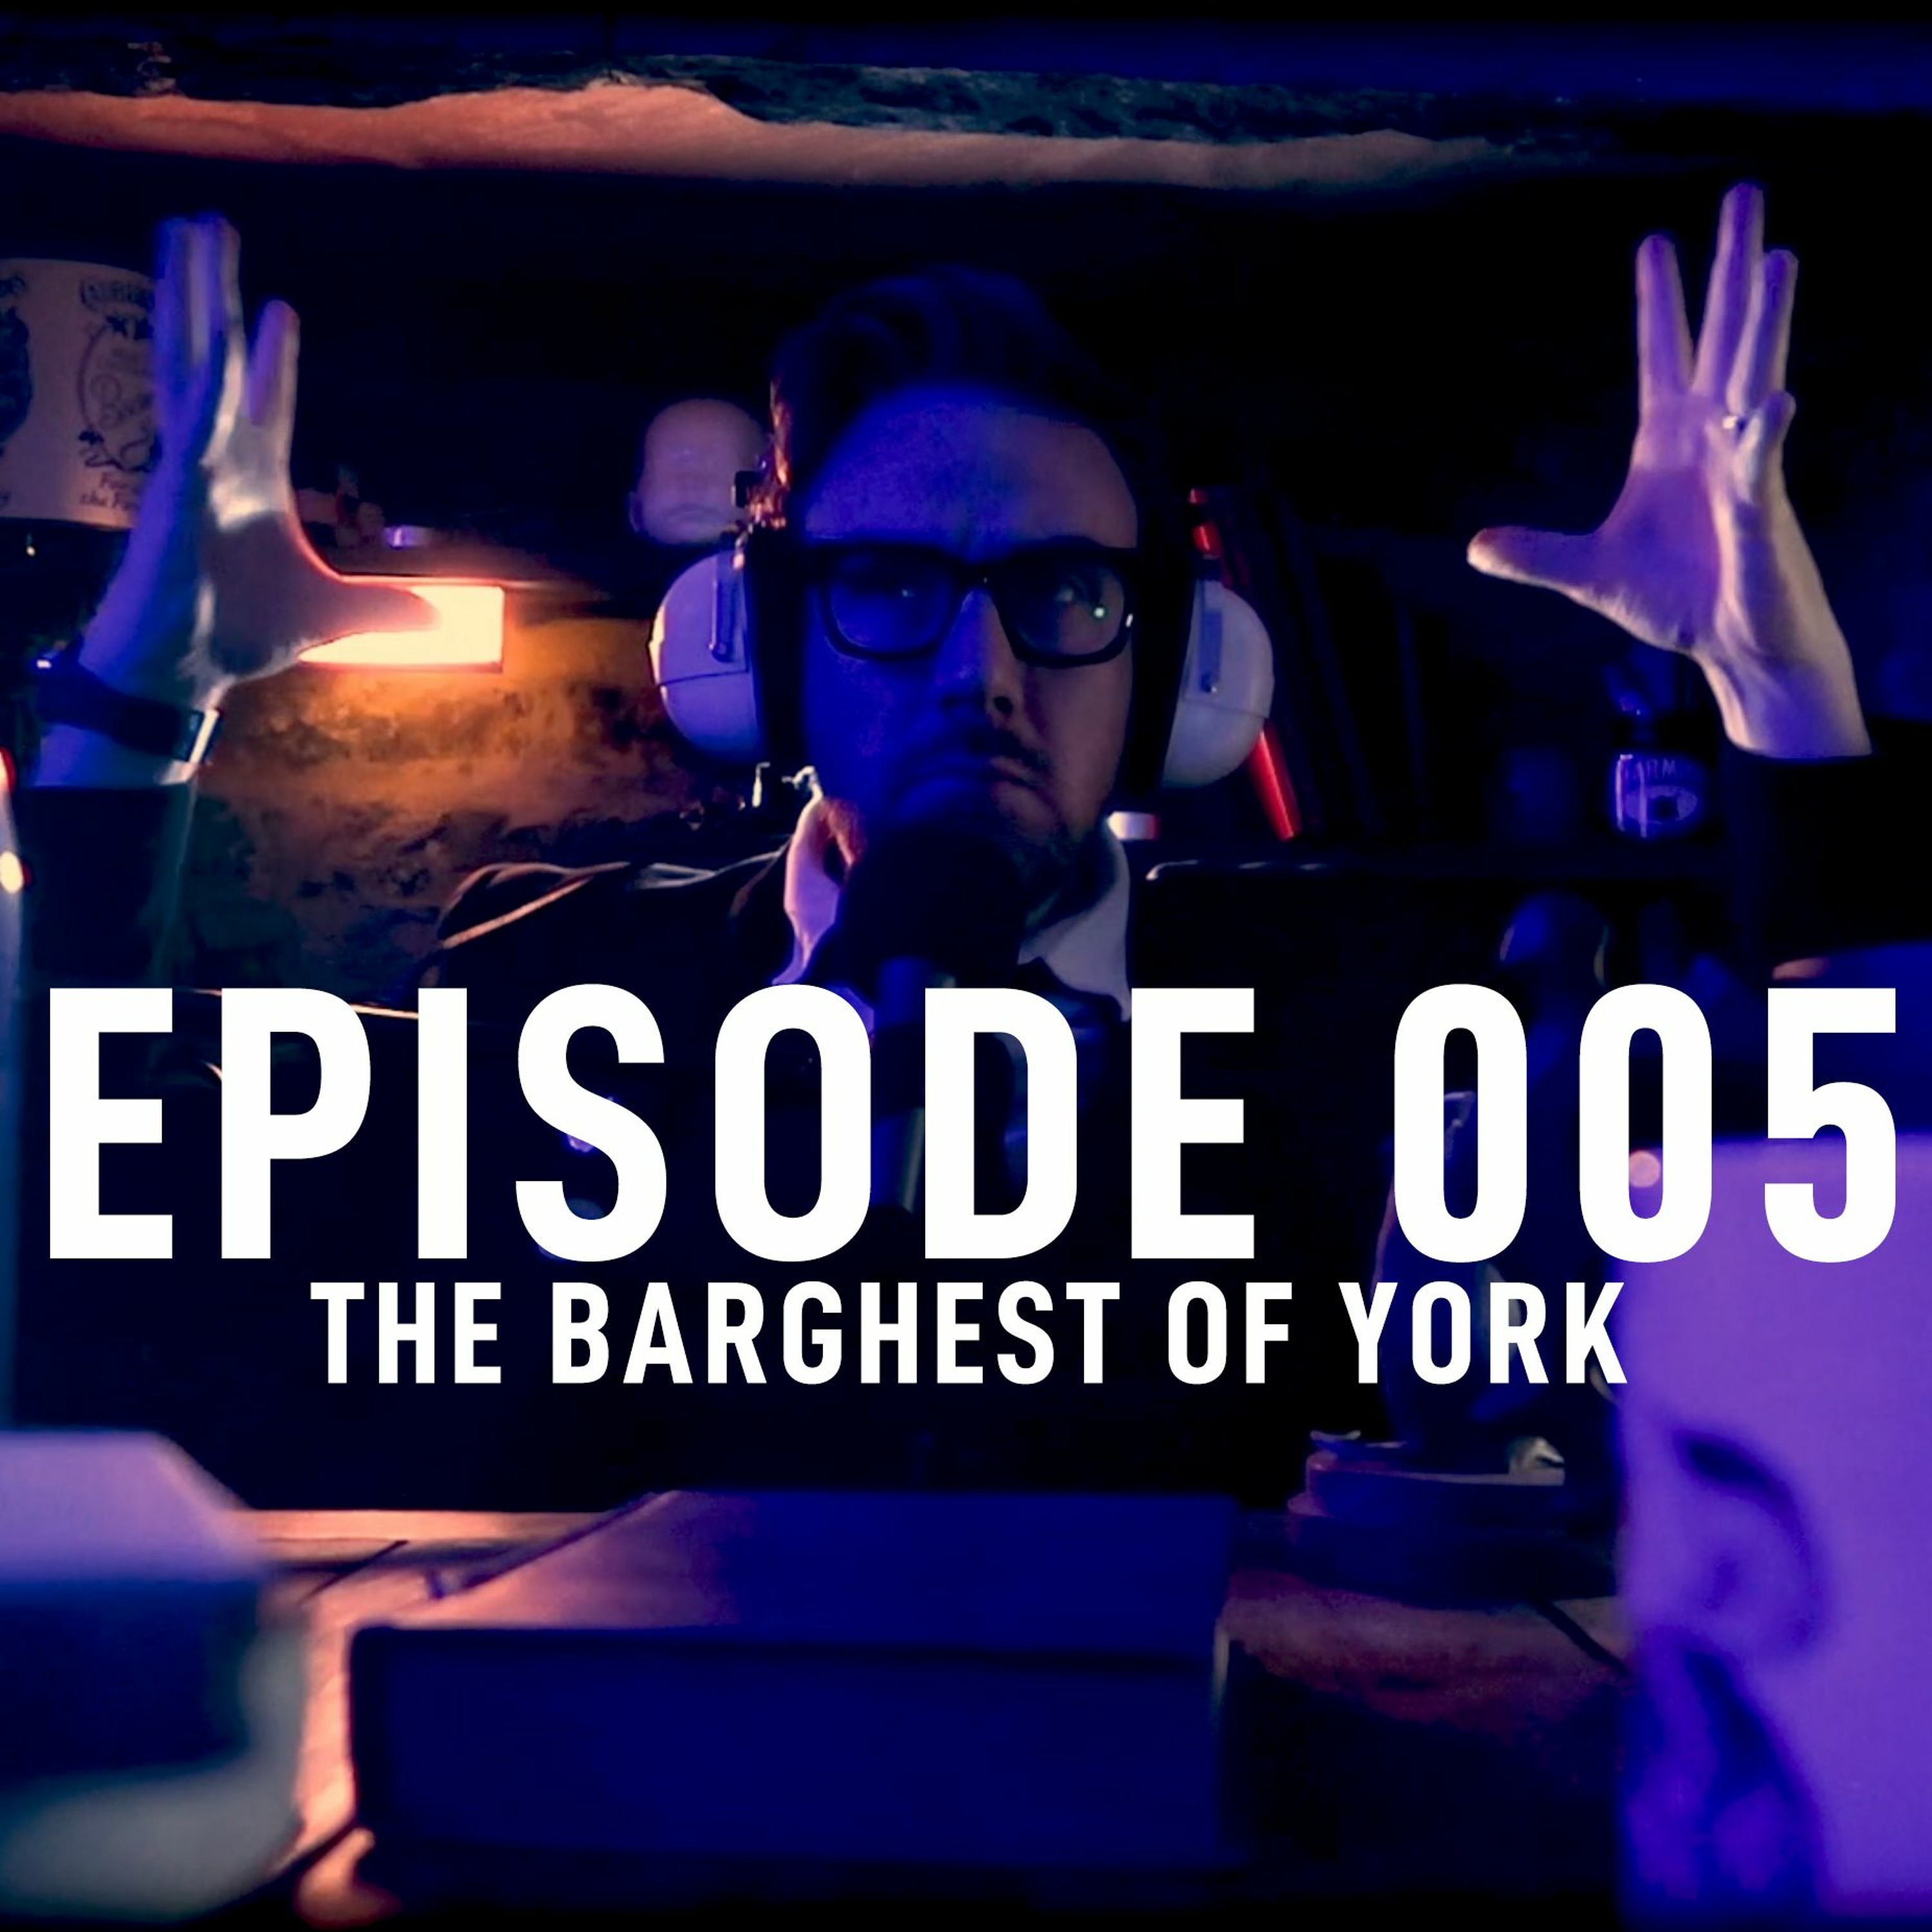 Episode 005 - The Barghest of York